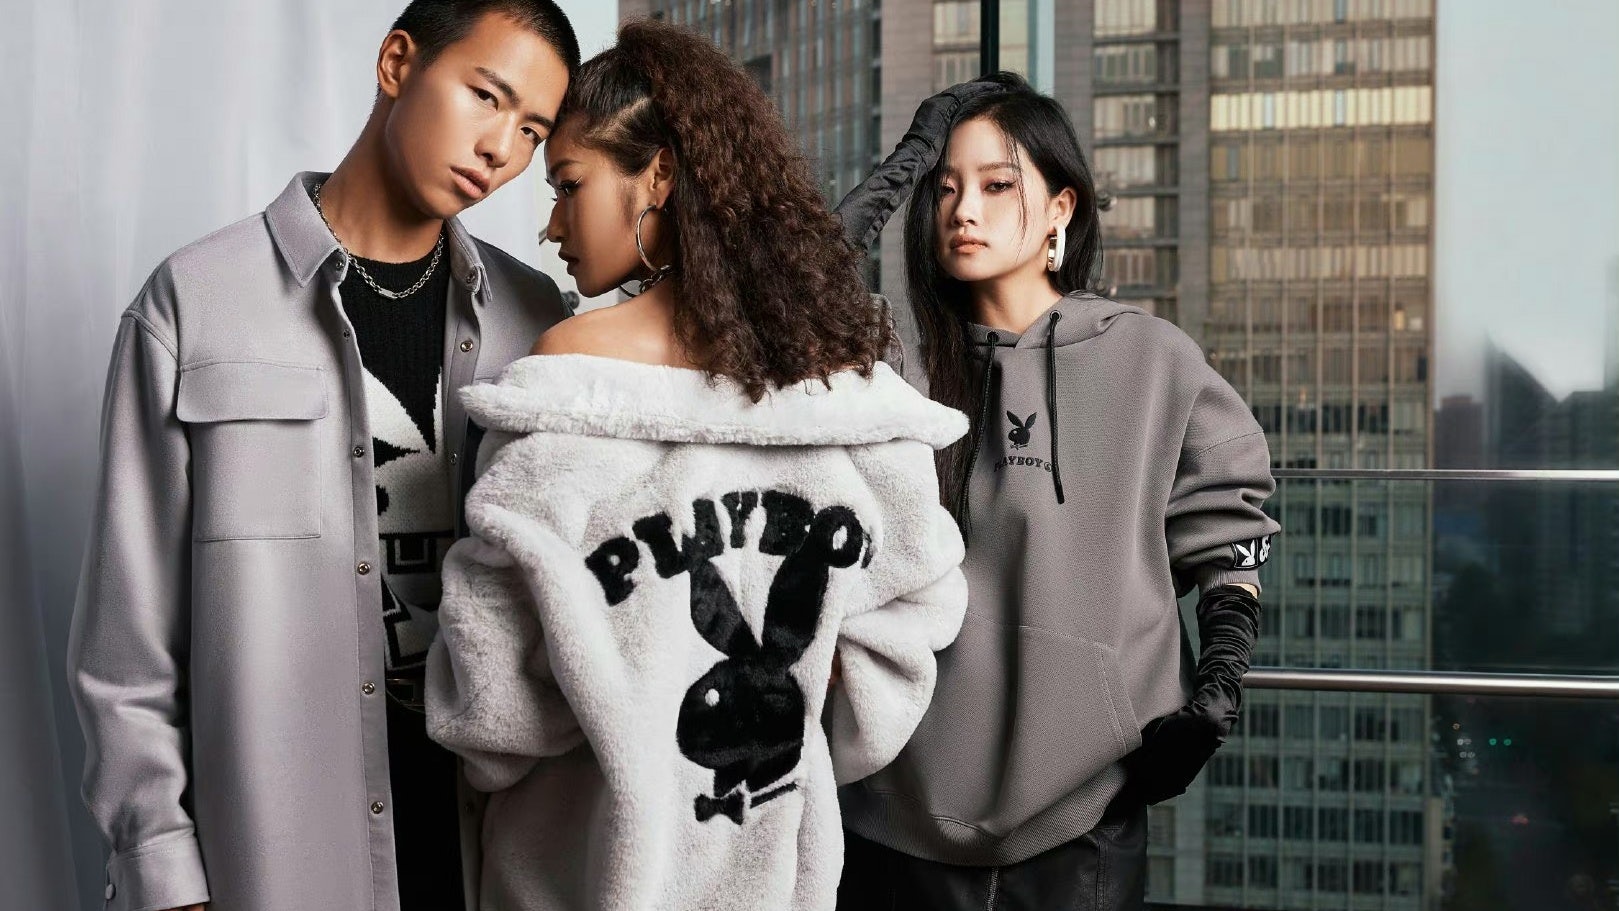 Playboy is looking to revamp its brand image in China during the Year of the Rabbit. But after 30 years of licensing, is it too late for a turnaround? Photo: Playboy x Jack & Jones